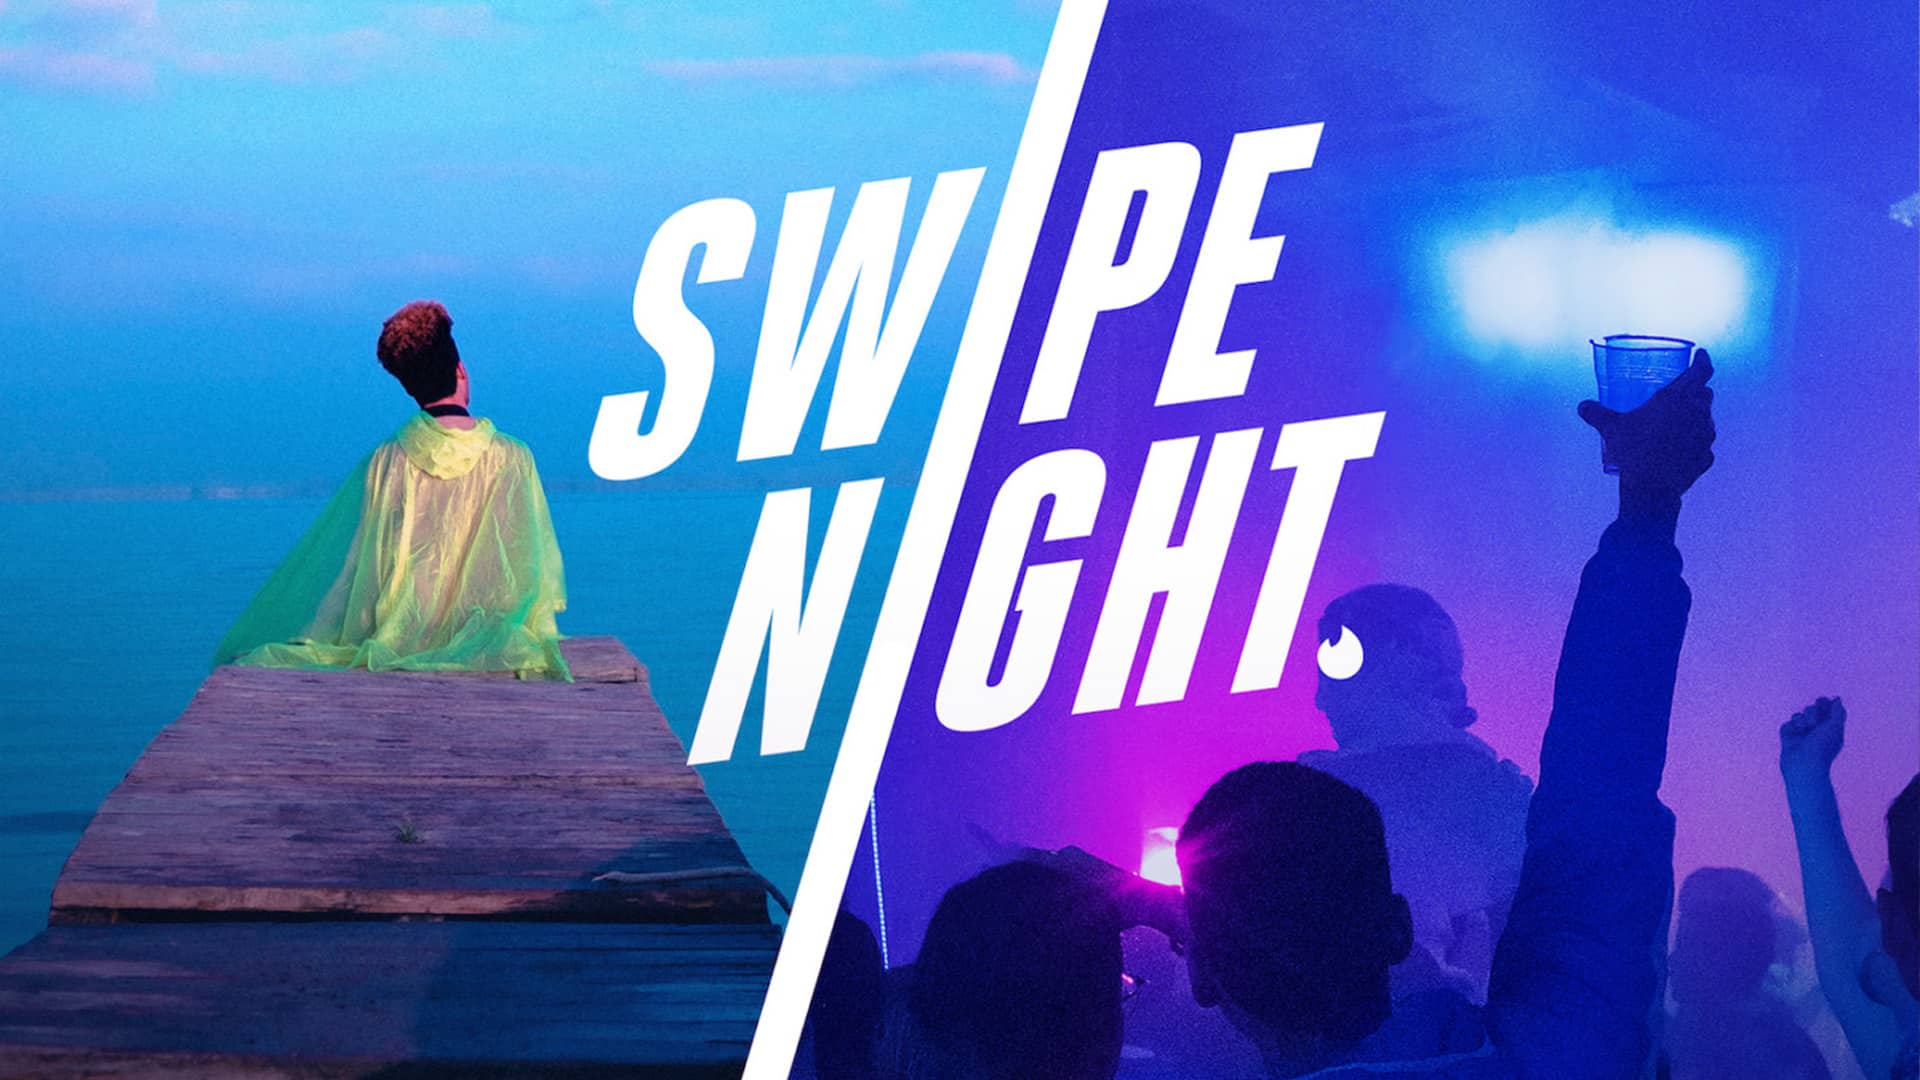 Tinder to host new edition of Swipe Night from Nov 7